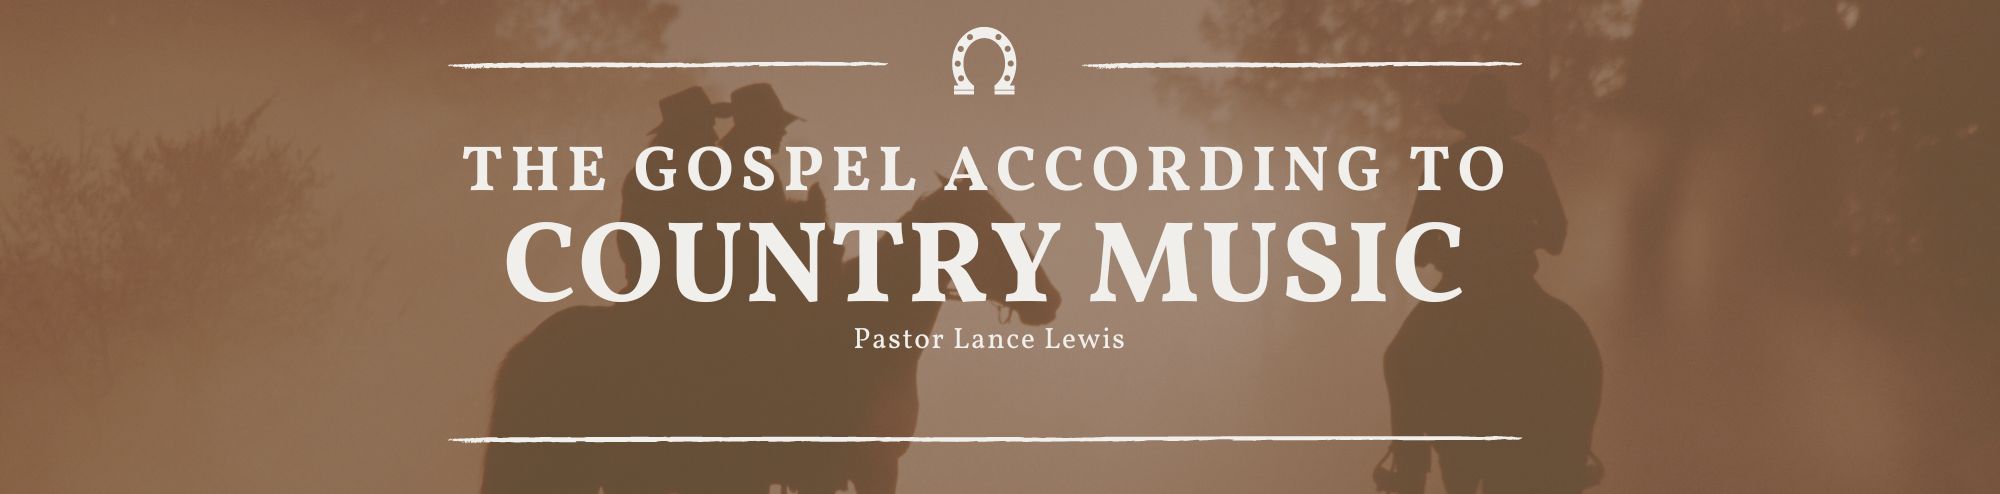 The Gospel According To Country Music